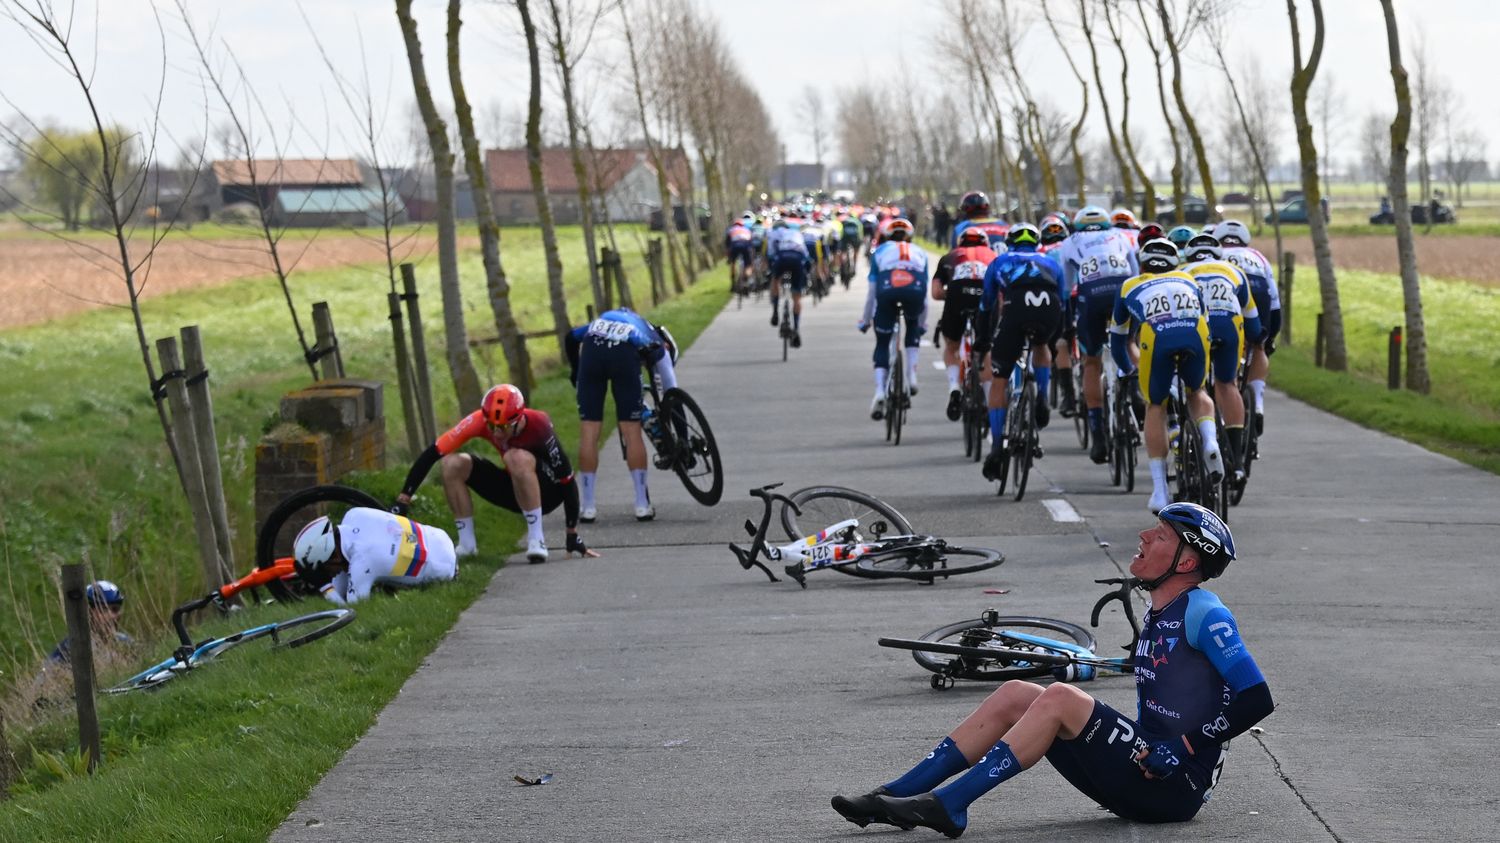 Cycling: French riders' union calls for "General Safety Measures" after numerous serious crashes